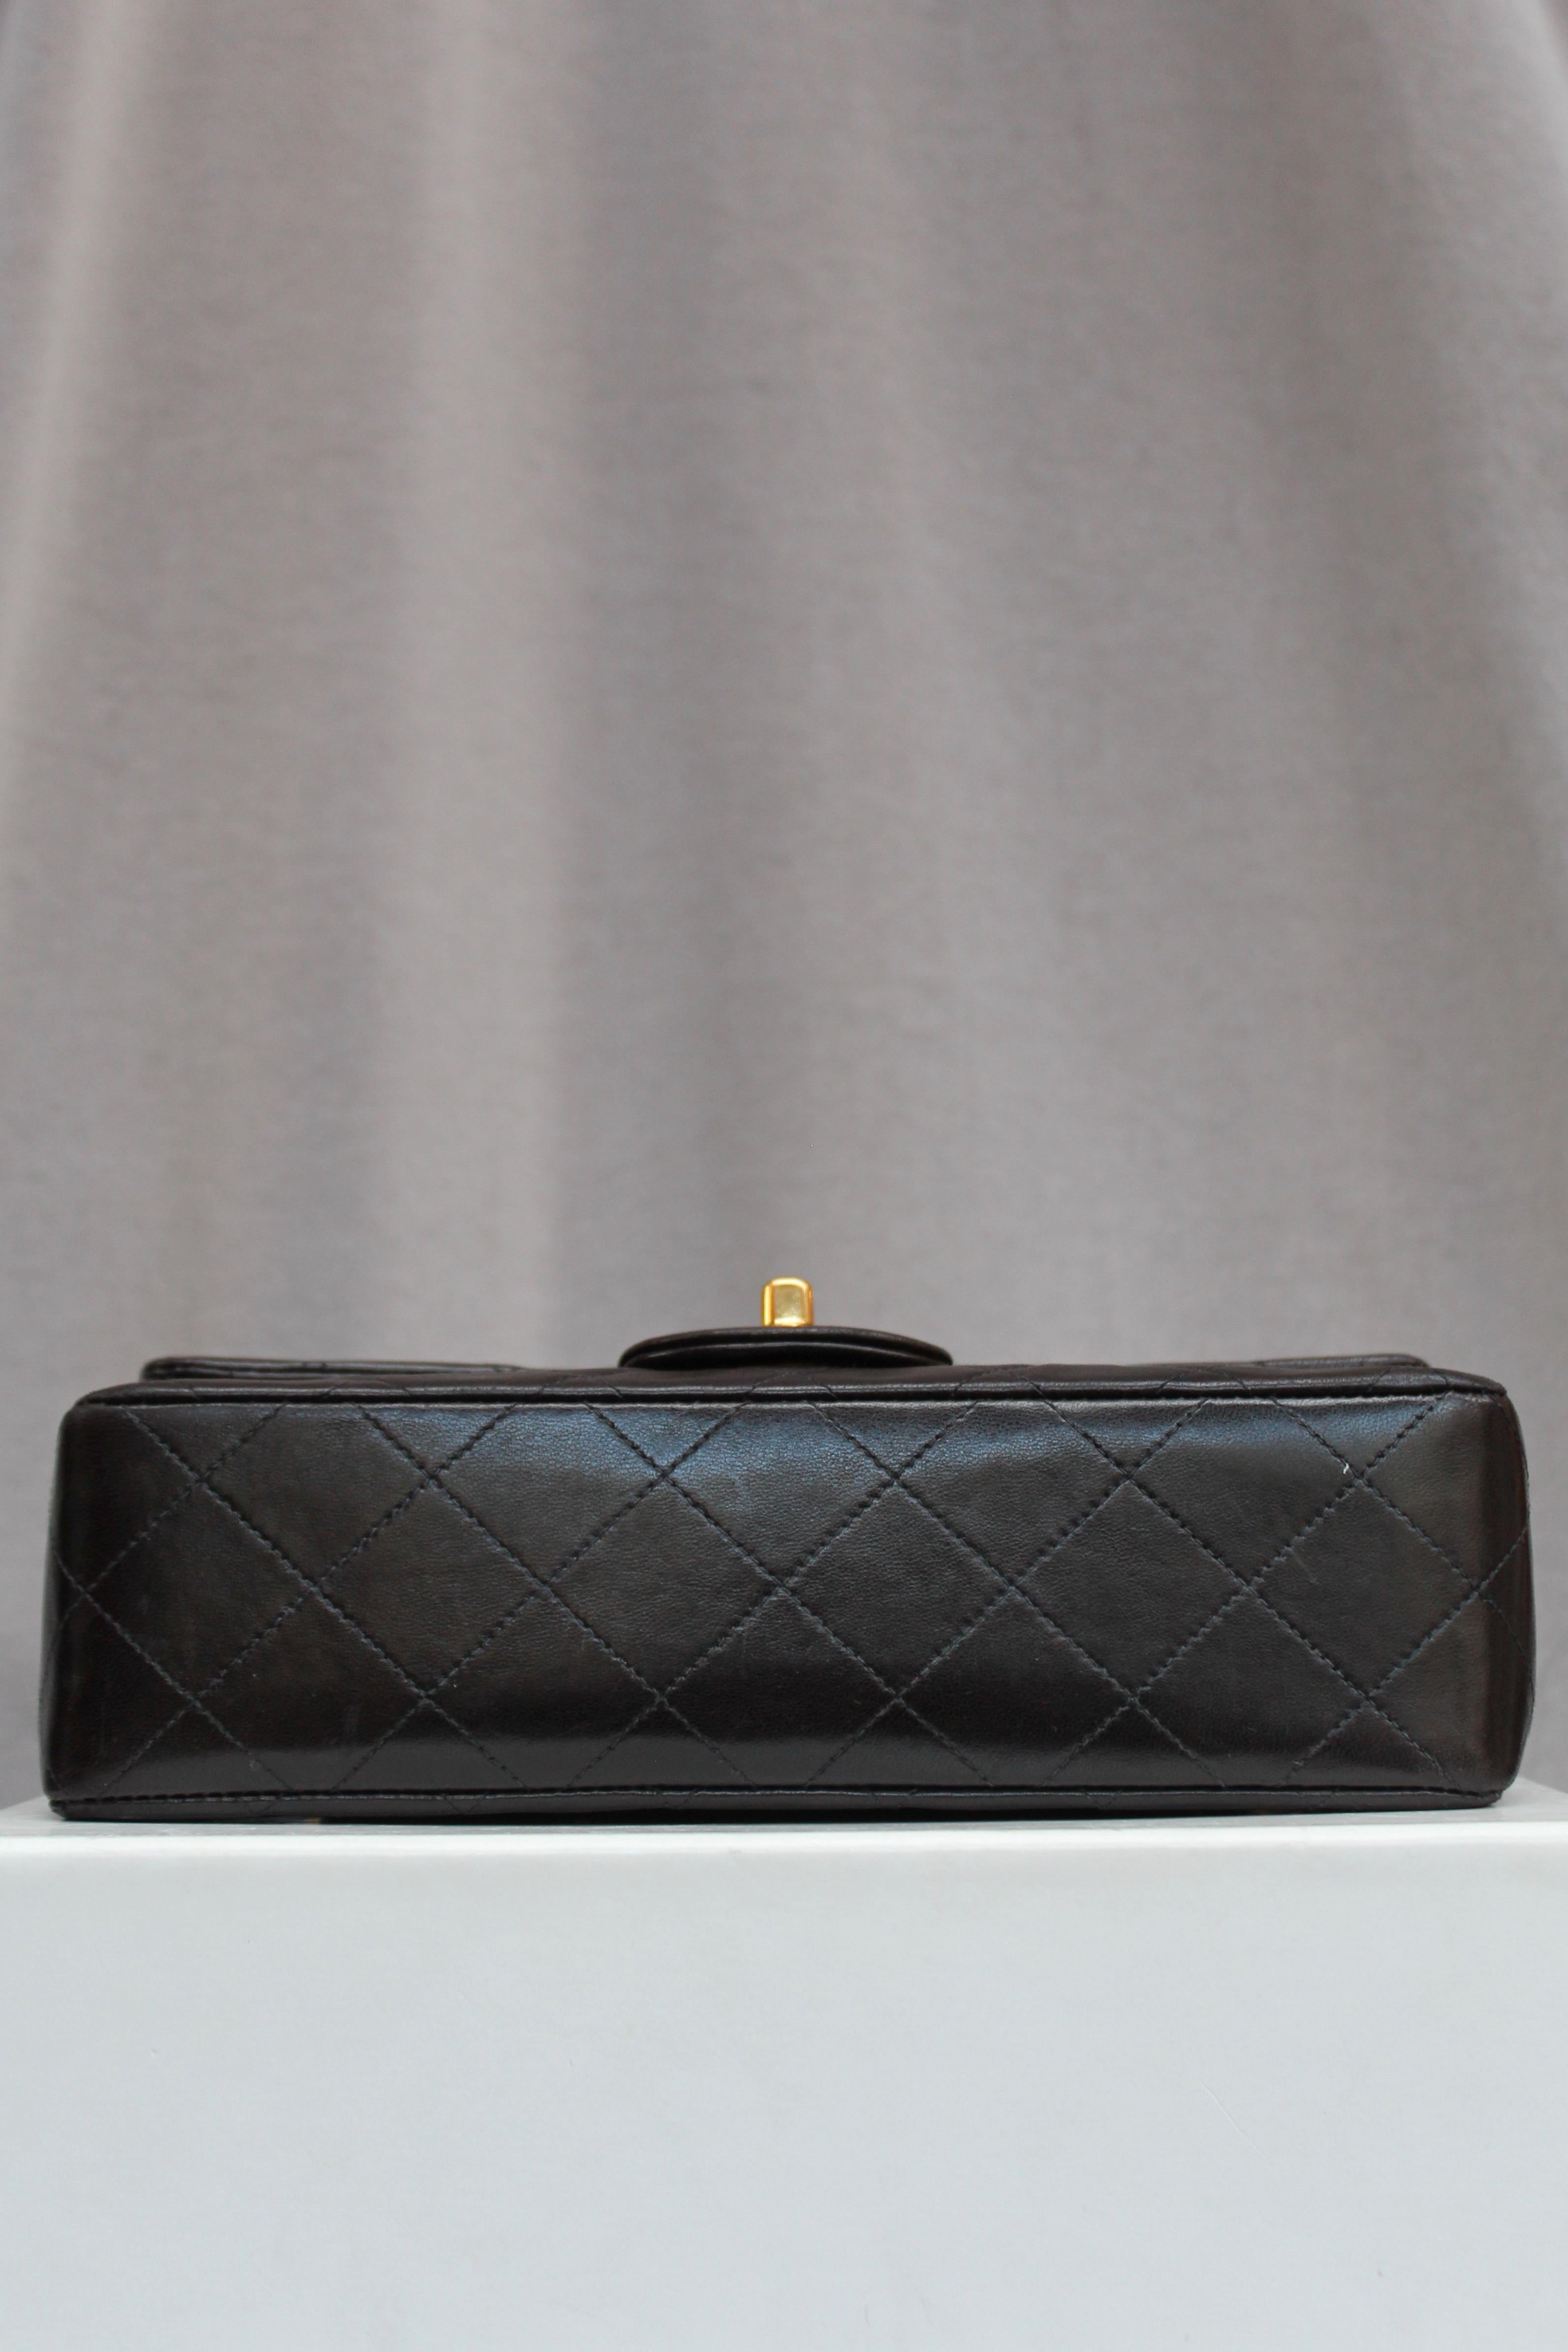 Chanel “Timeless” brown lambskin bag For Sale 2